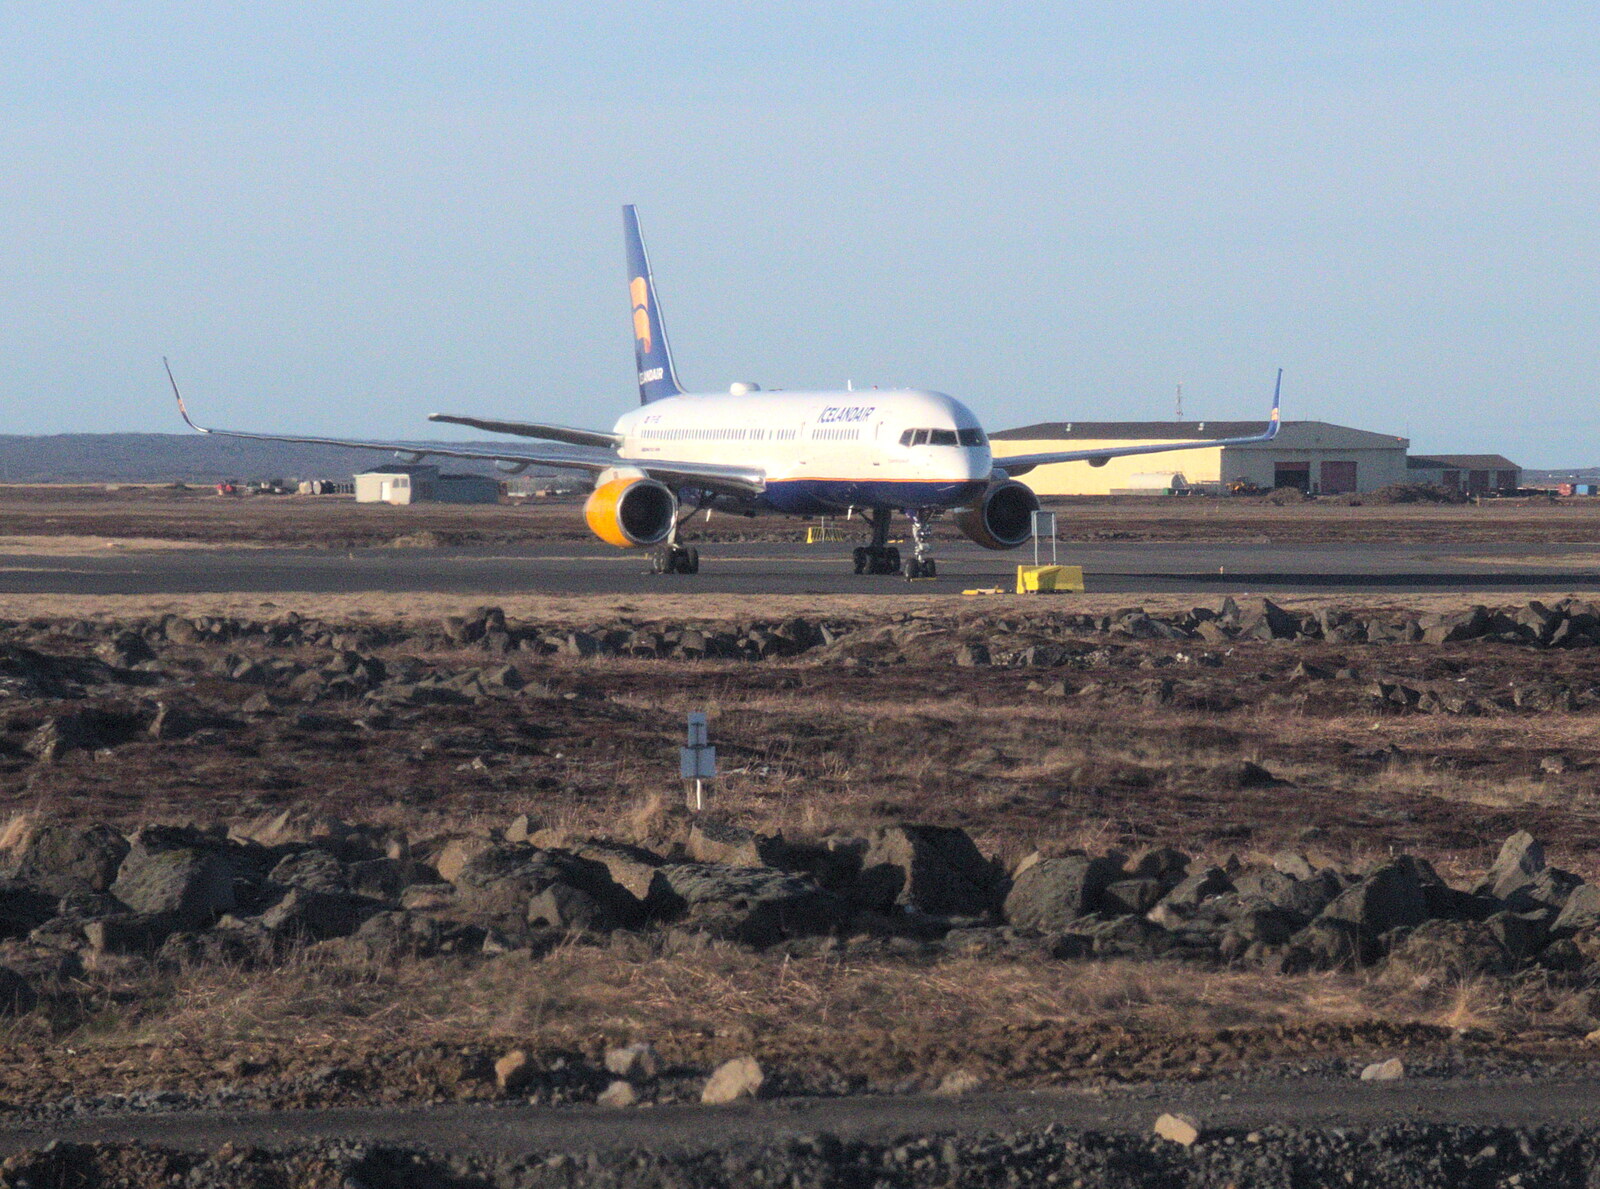 An IcelandAir 737 from The Journey Home, Reykjavik, London and Brantham - 24th April 2017